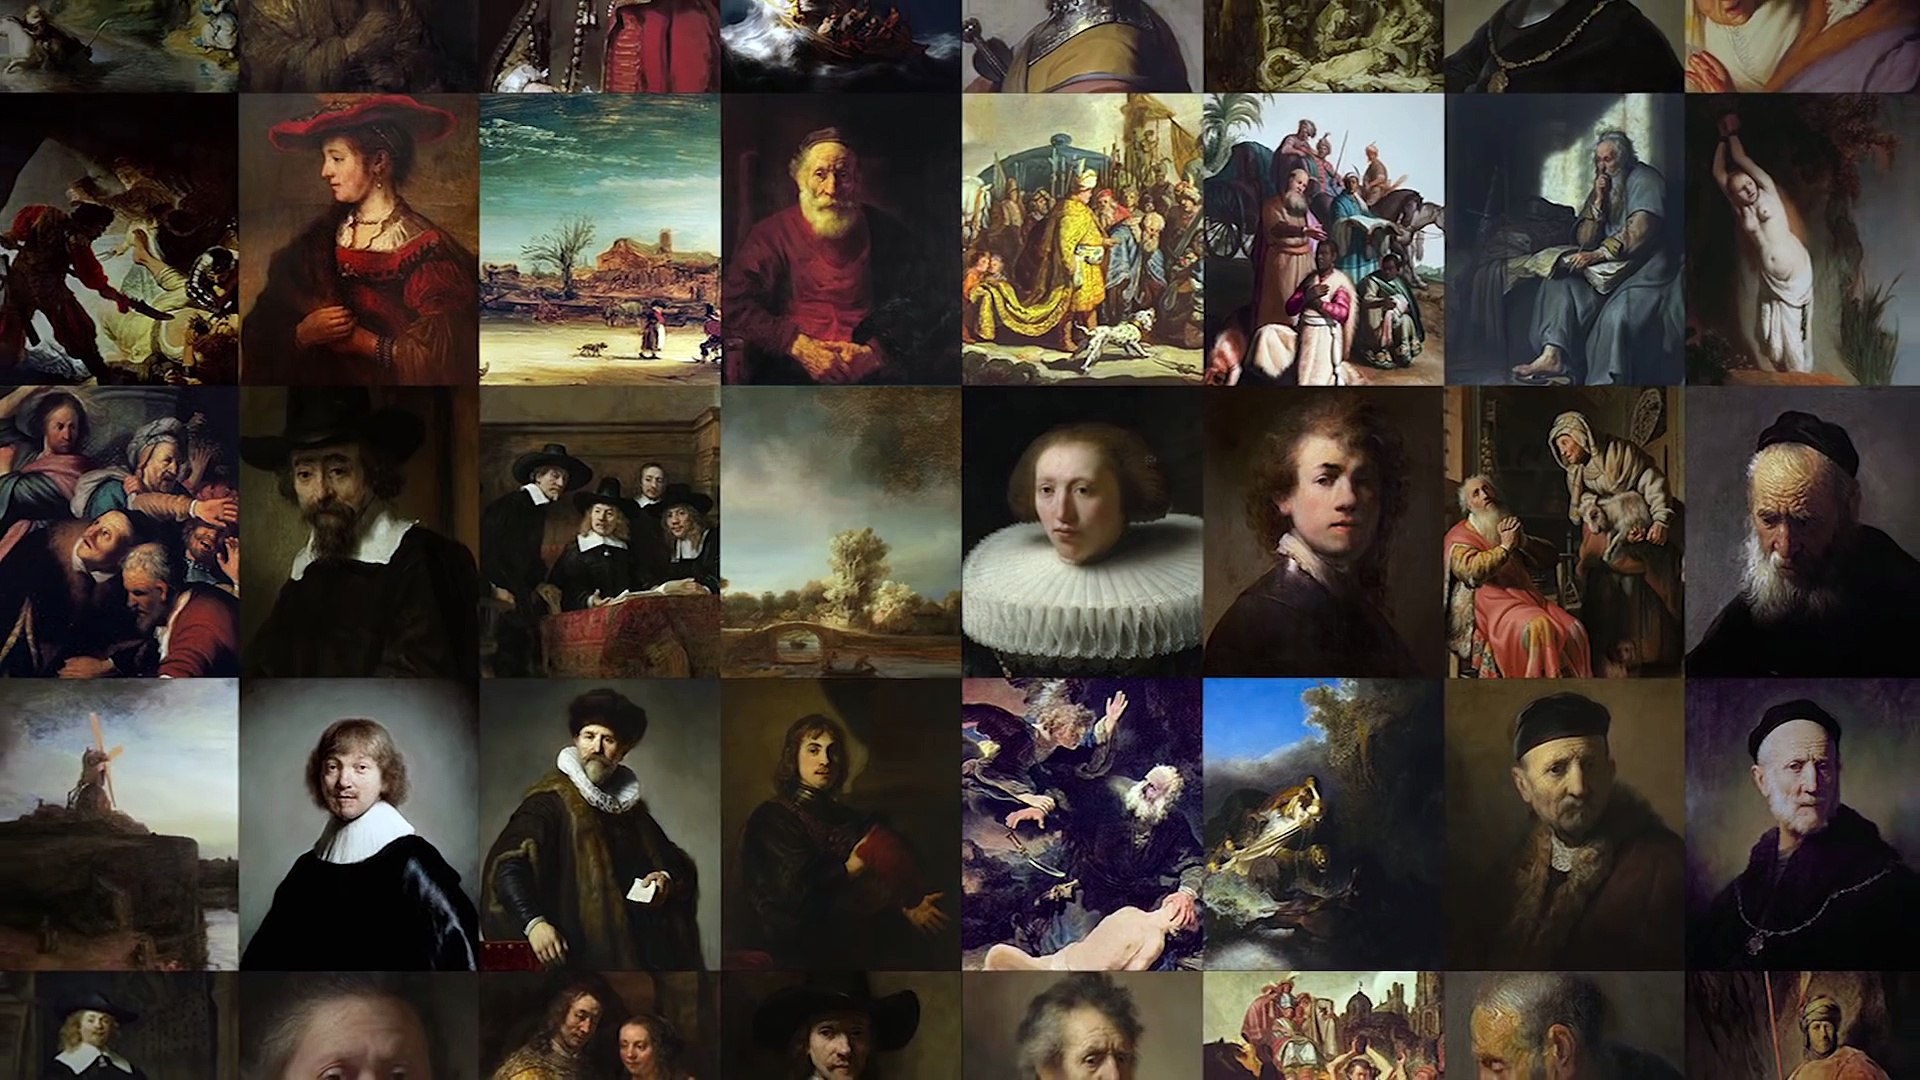 The Next Rembrandt A picture drawn by AI Deep learning